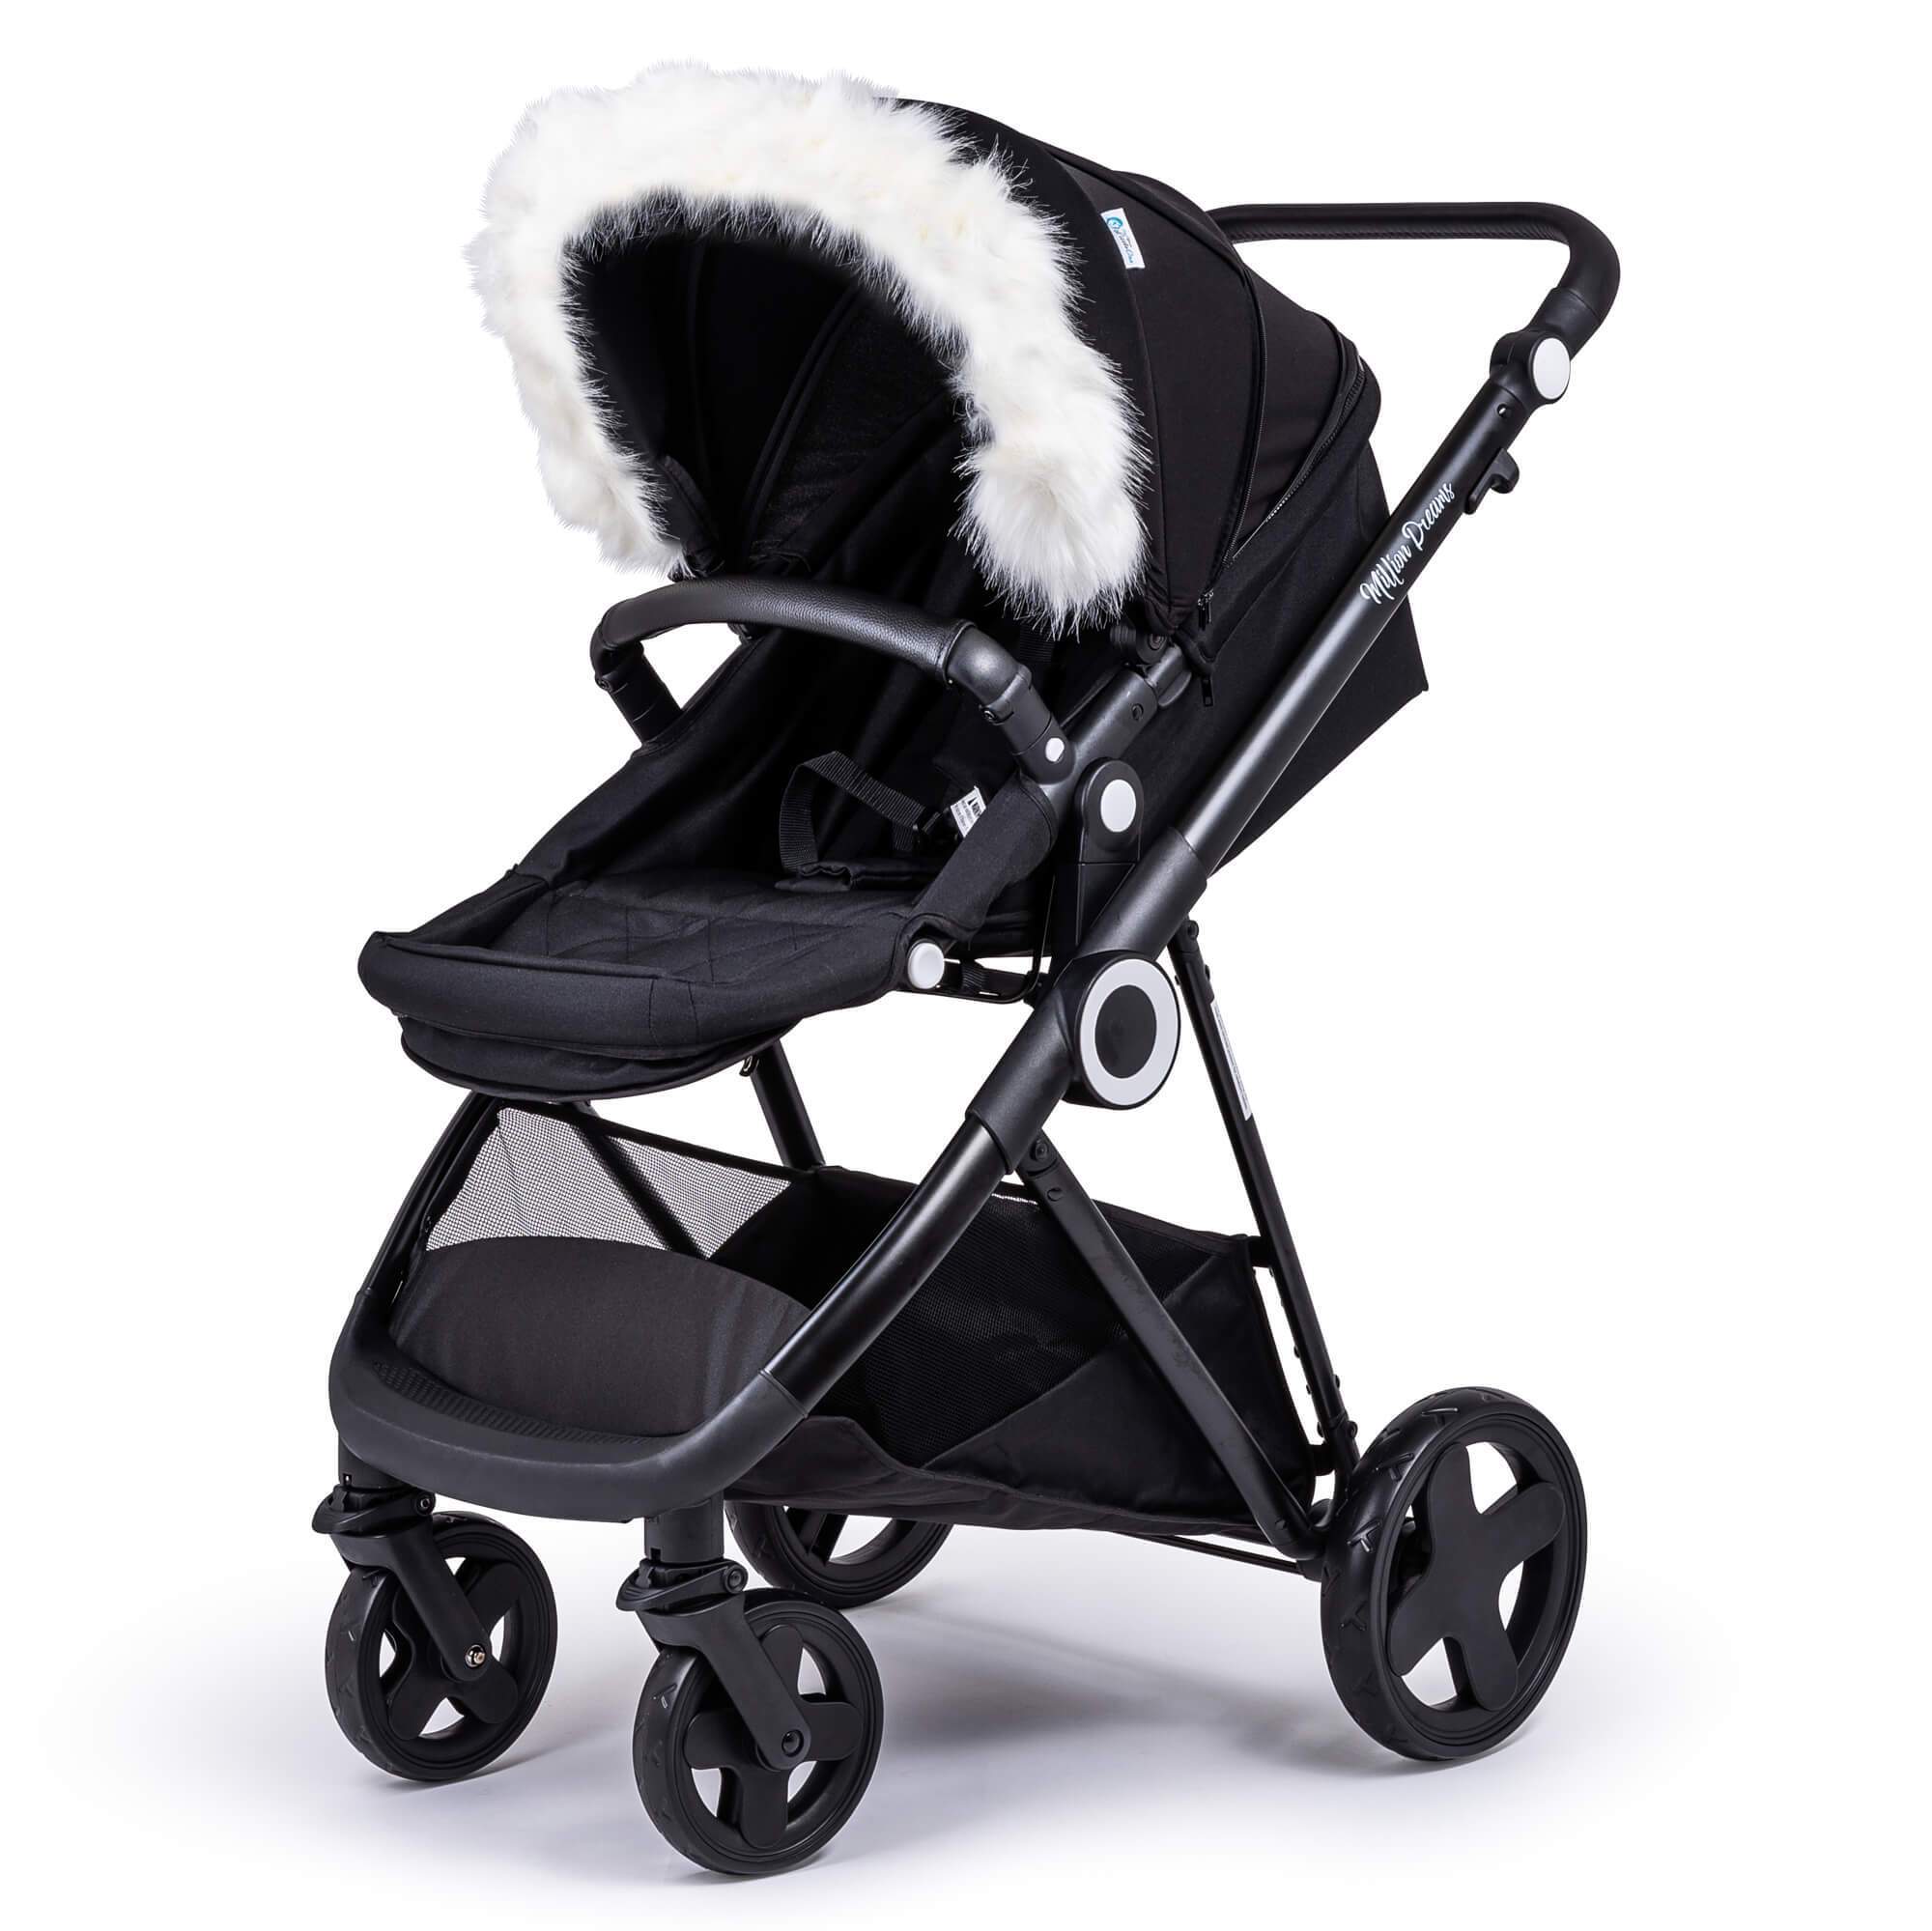 Pram Fur Hood Trim Attachment for Pushchair Compatible with Baby Trend - For Your Little One